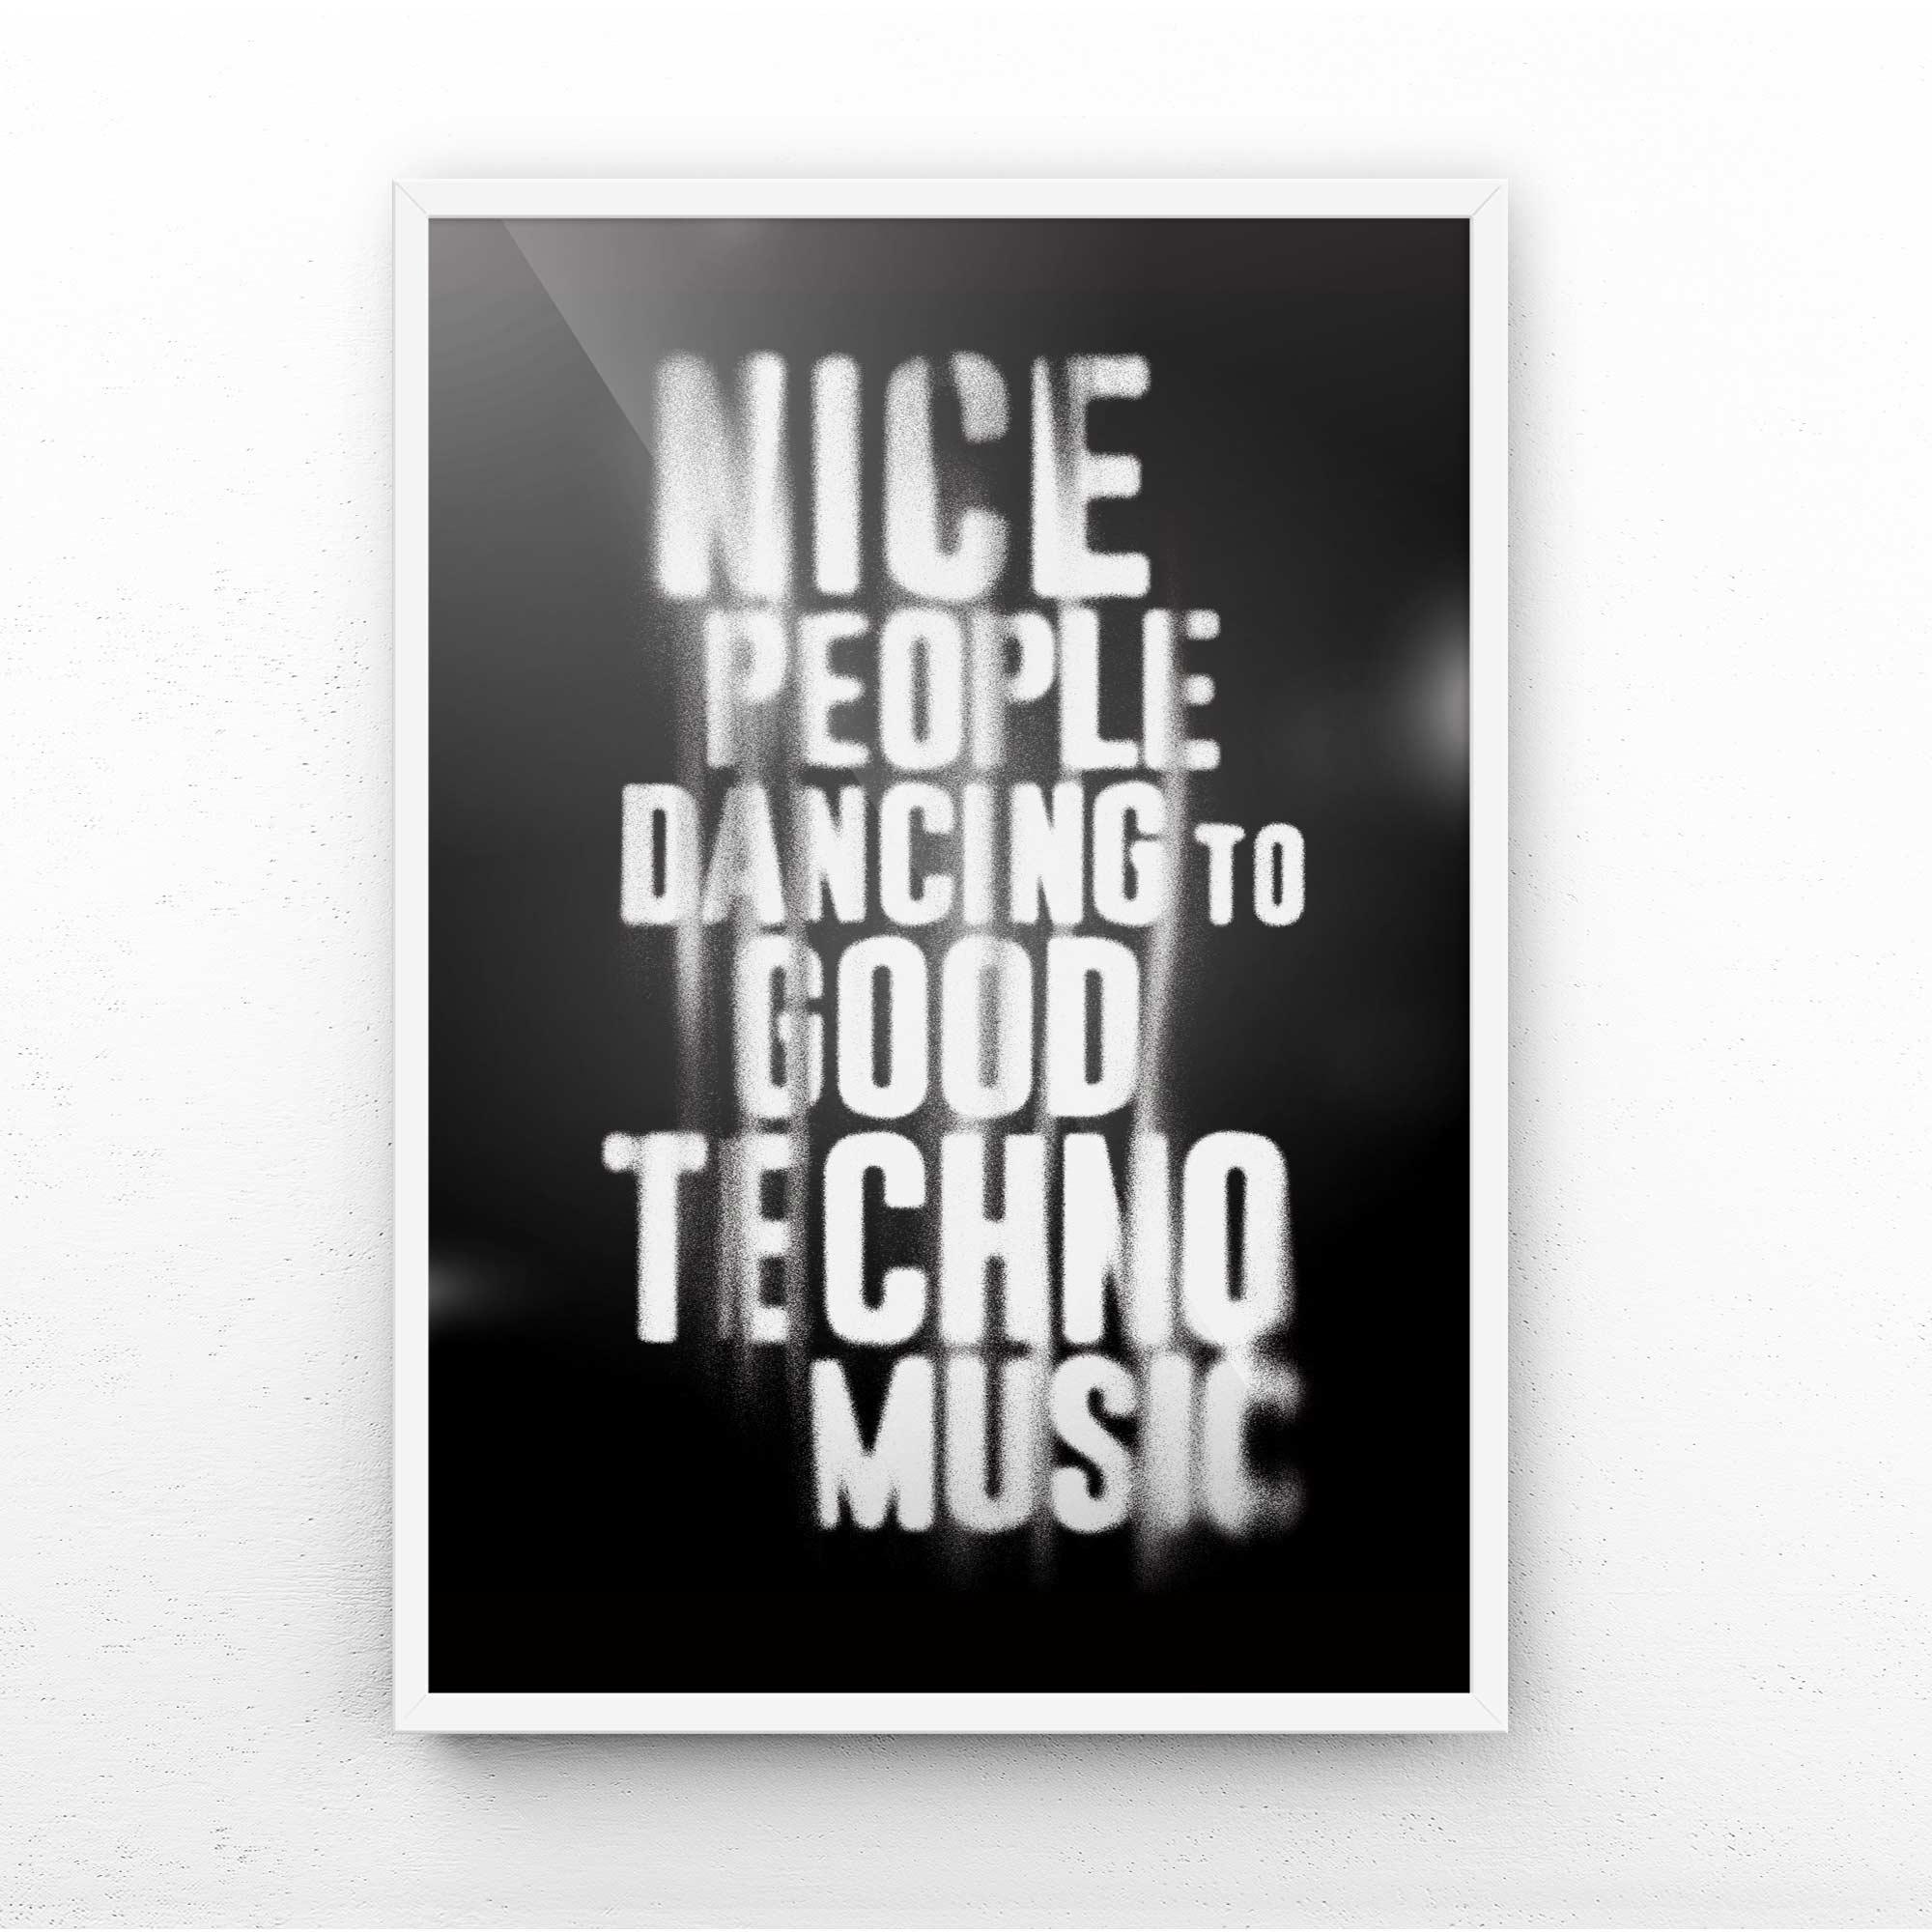 NICE PEOPLE DANCING TO GOOD TECHNO MUSIC PRINT - Afterhours Gallery 